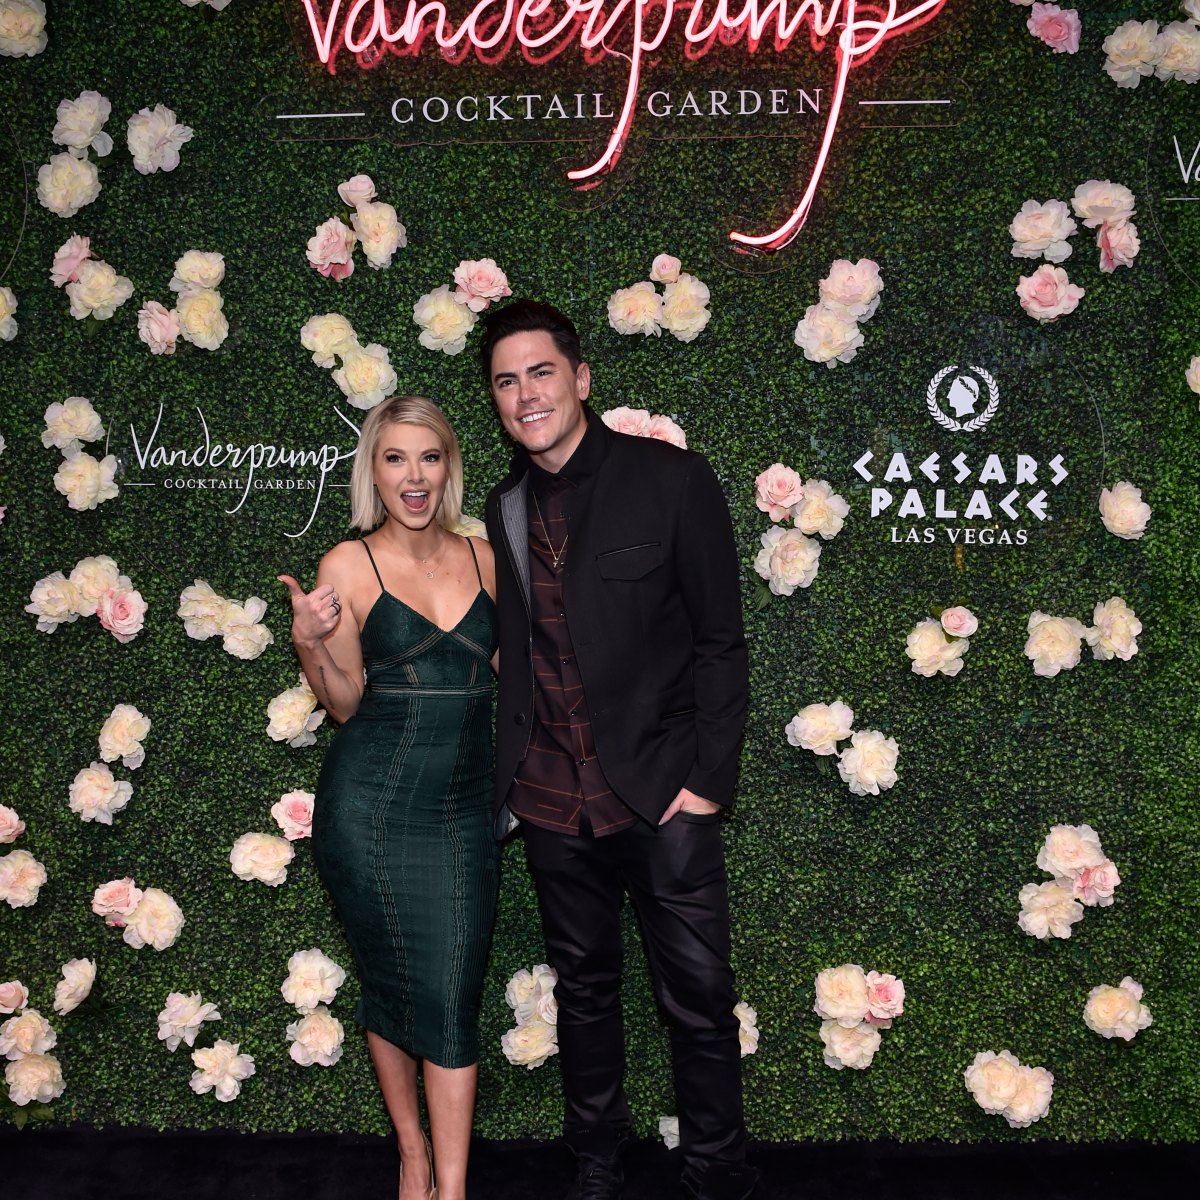 Went to Vanderpump Cocktails & Garden and had the experience you